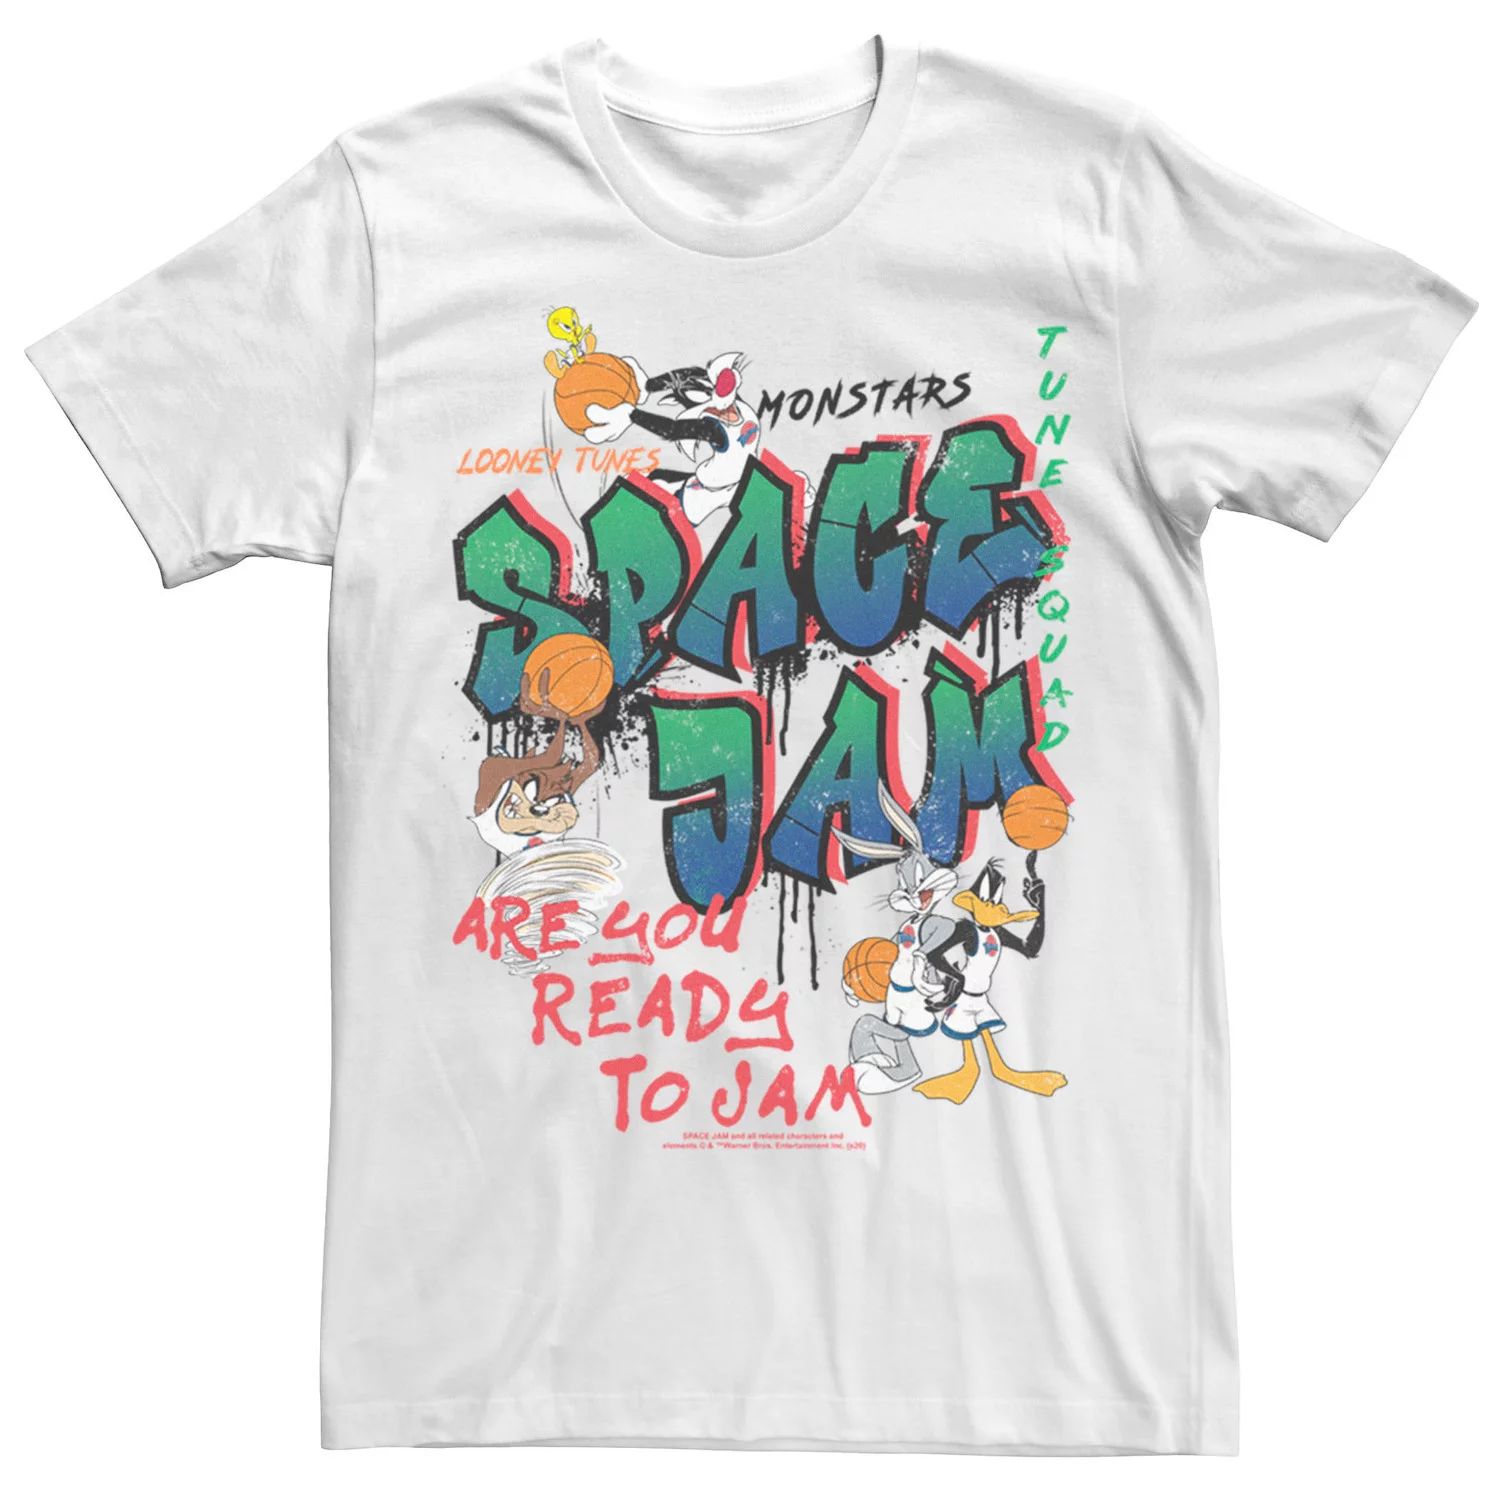 Мужская футболка Space Jam Are You Ready To Jam Graffiti Licensed Character